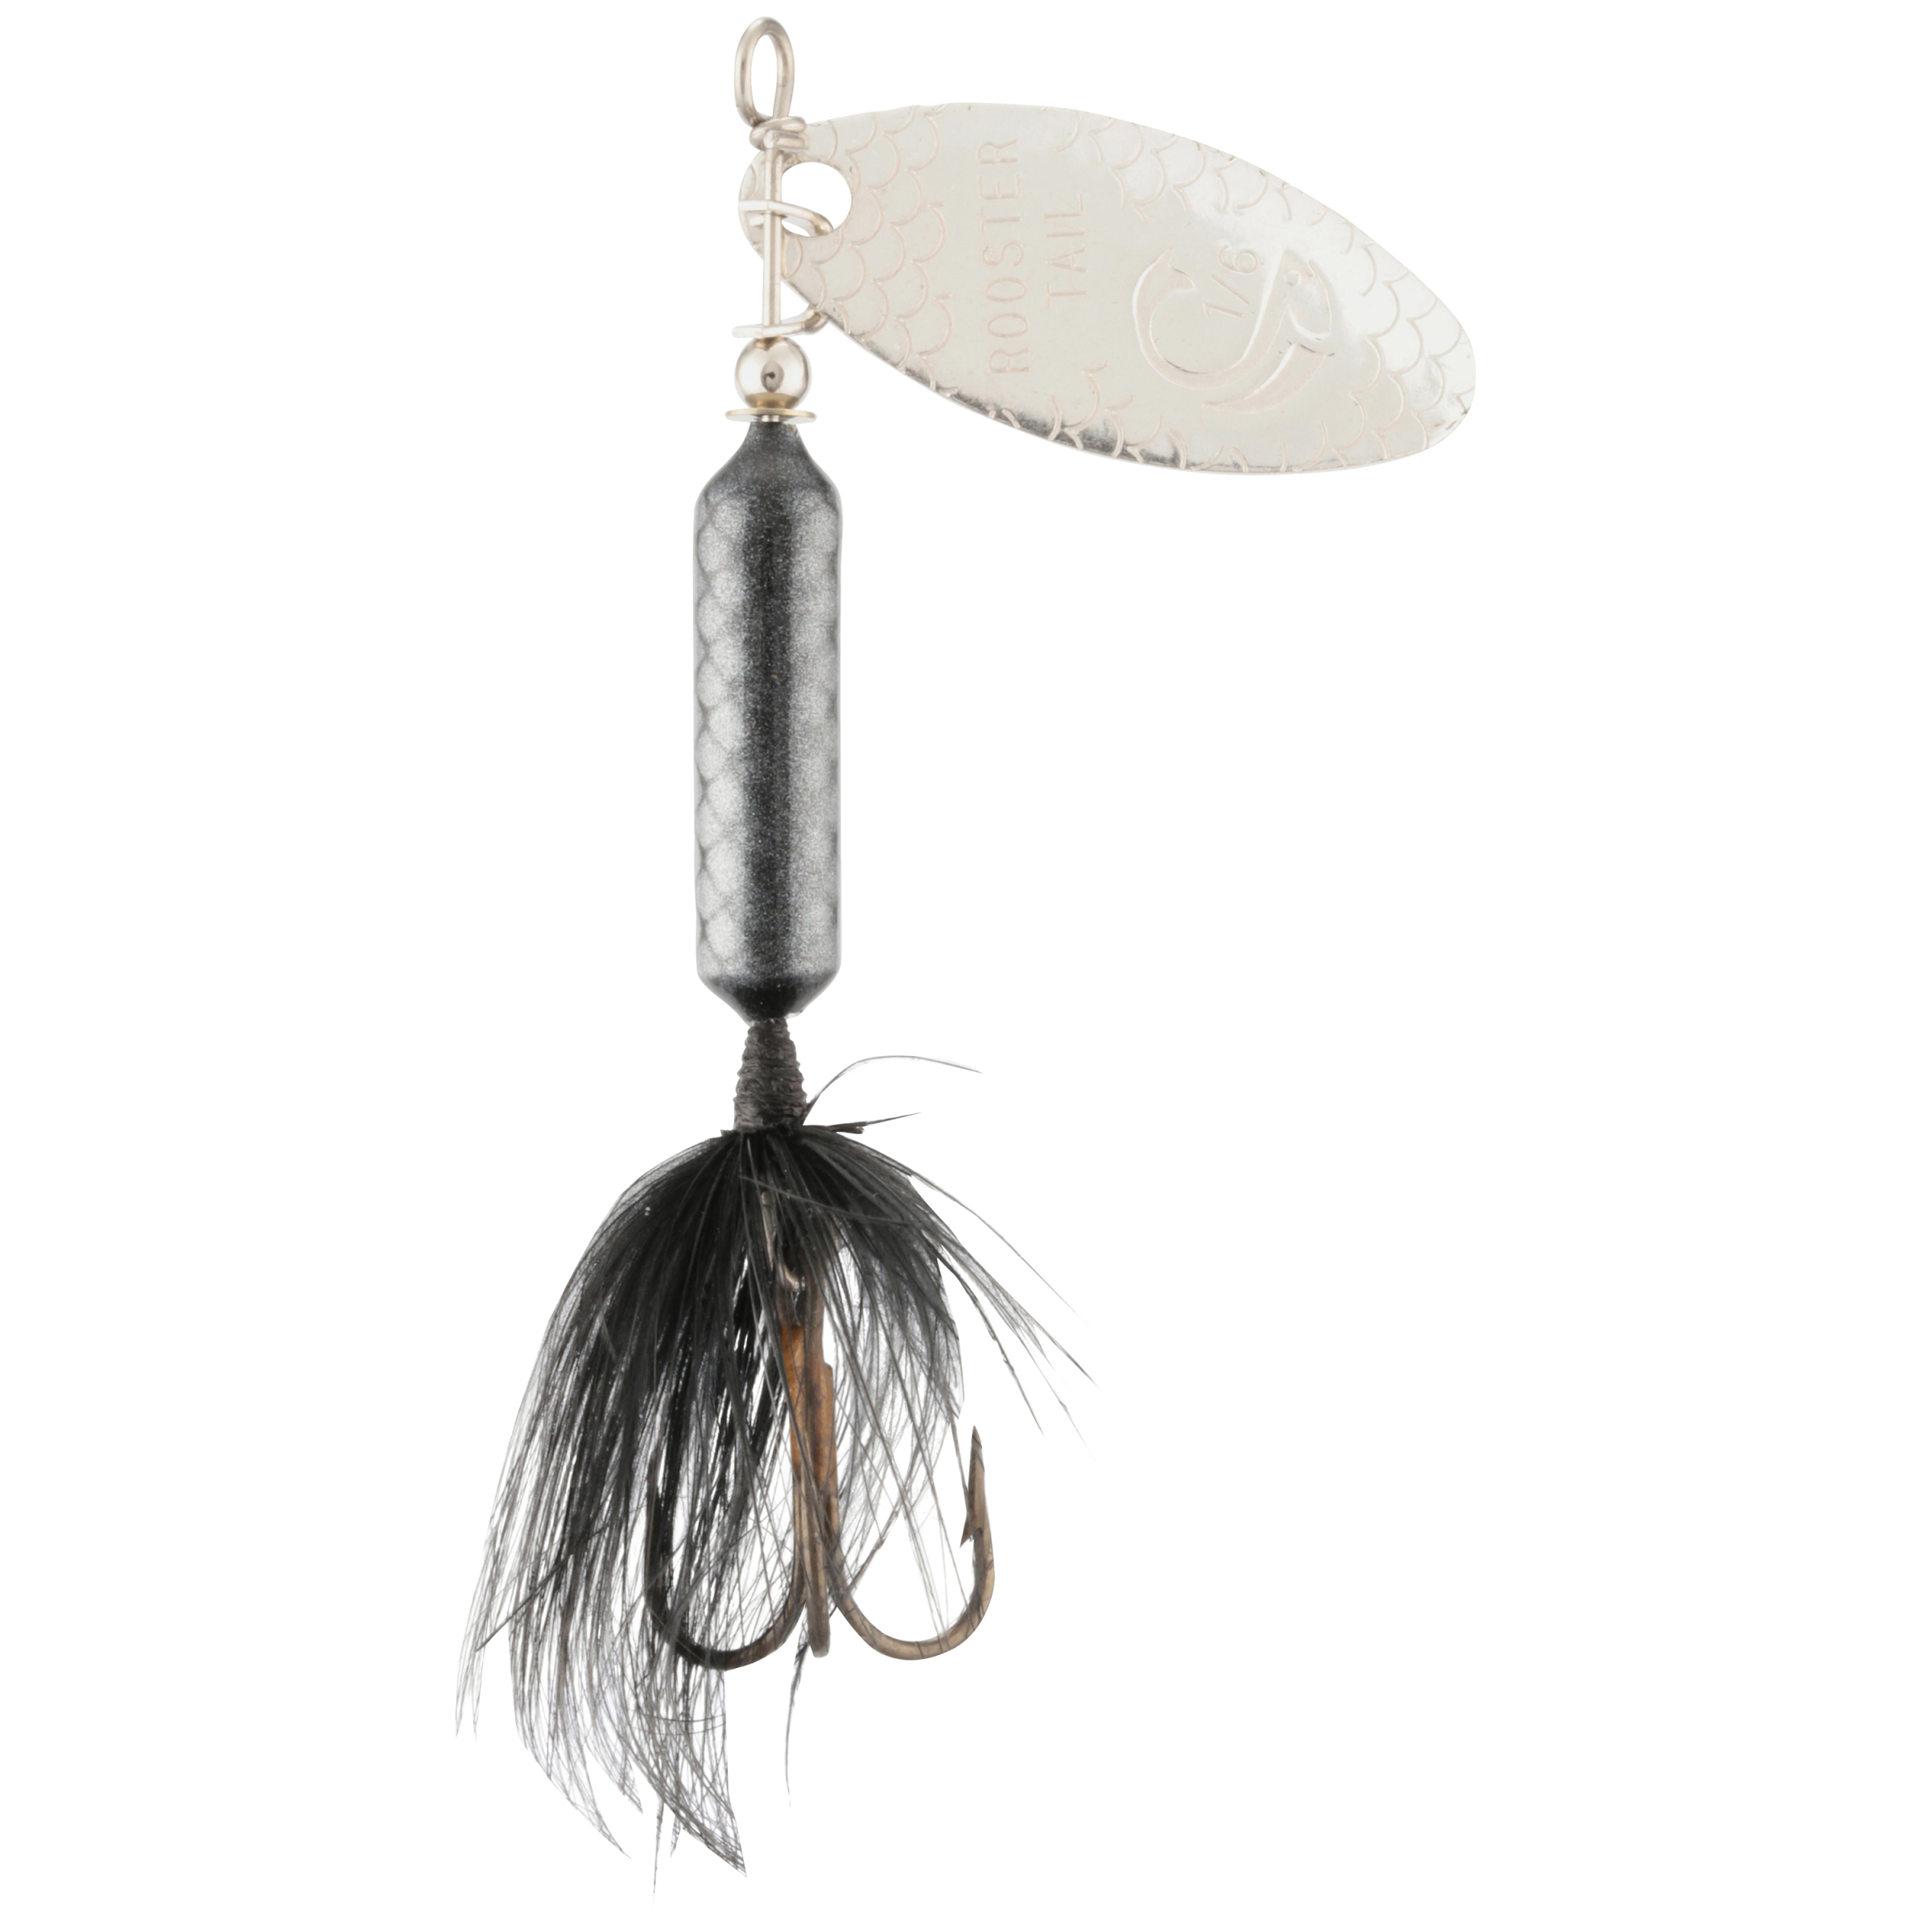 Worden's® Original Black Rooster Tail®, Inline Spinnerbait Fishing Lure, 1/6 oz Carded Pack - image 1 of 4